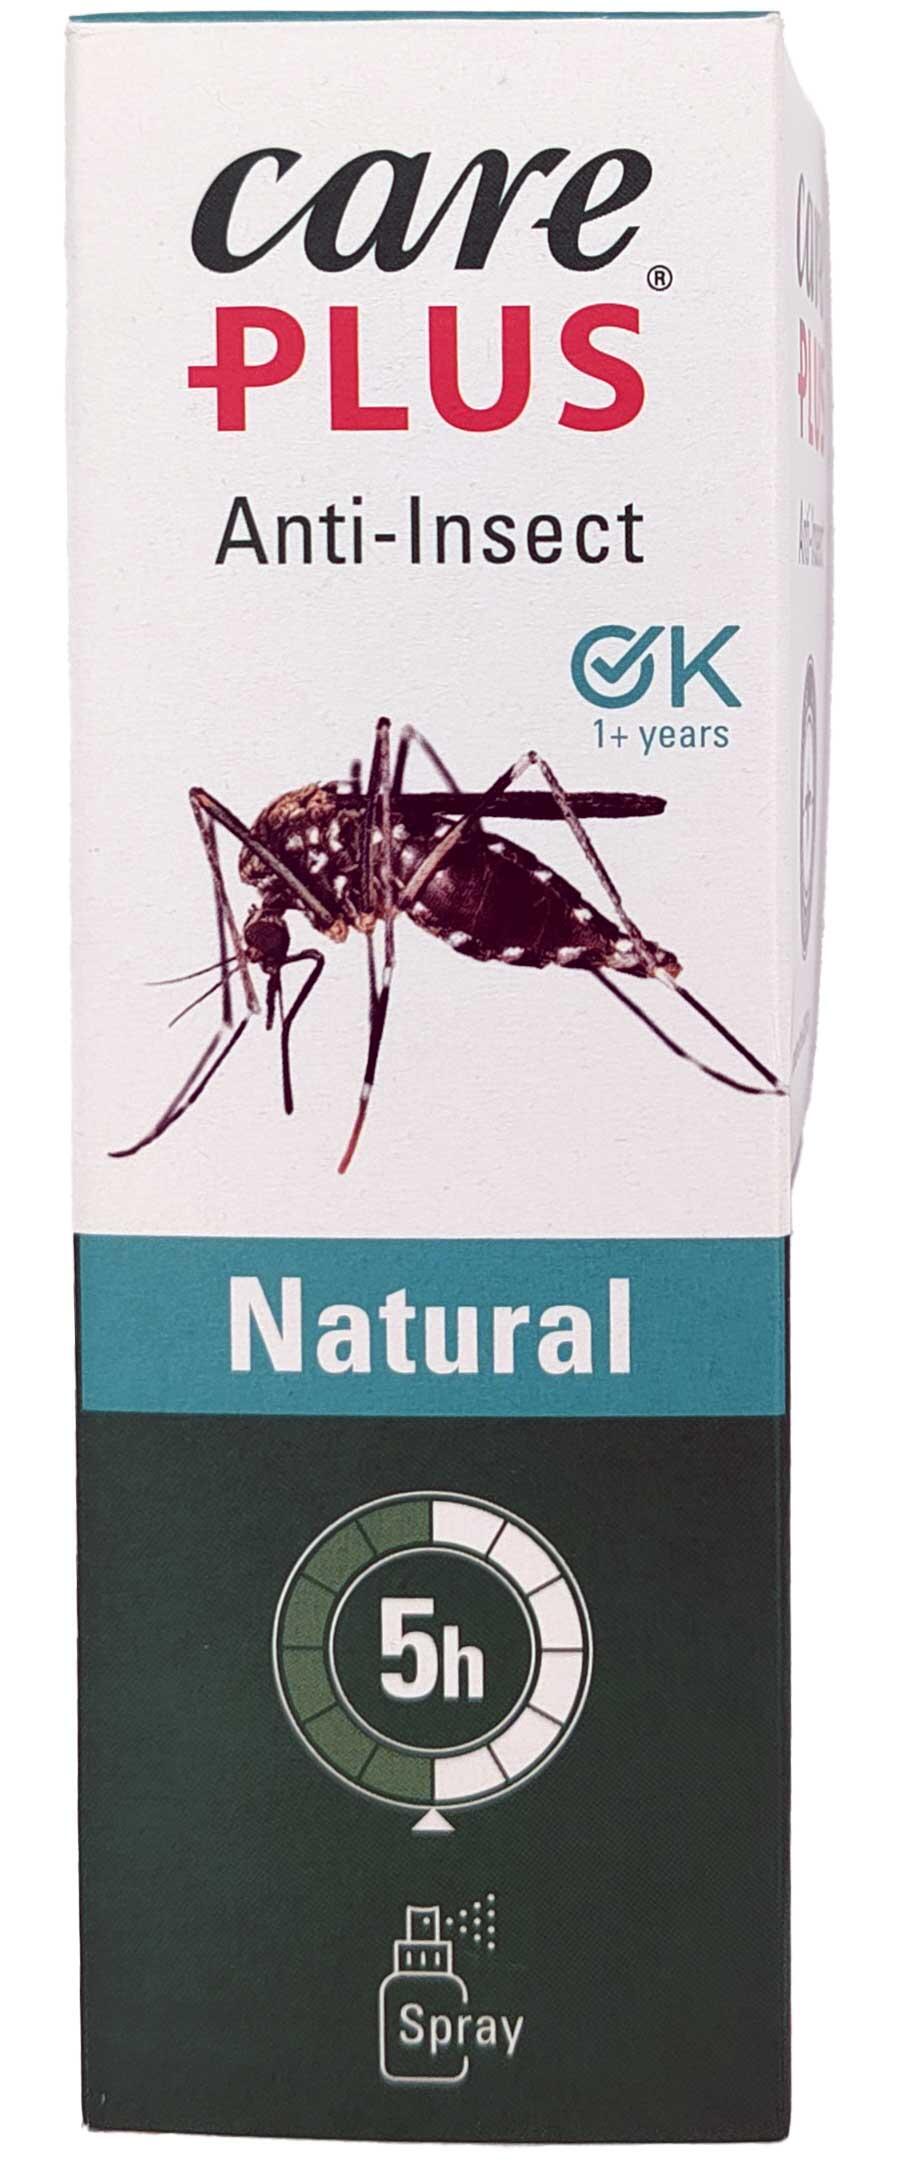 Anti-insect natural Care Plus